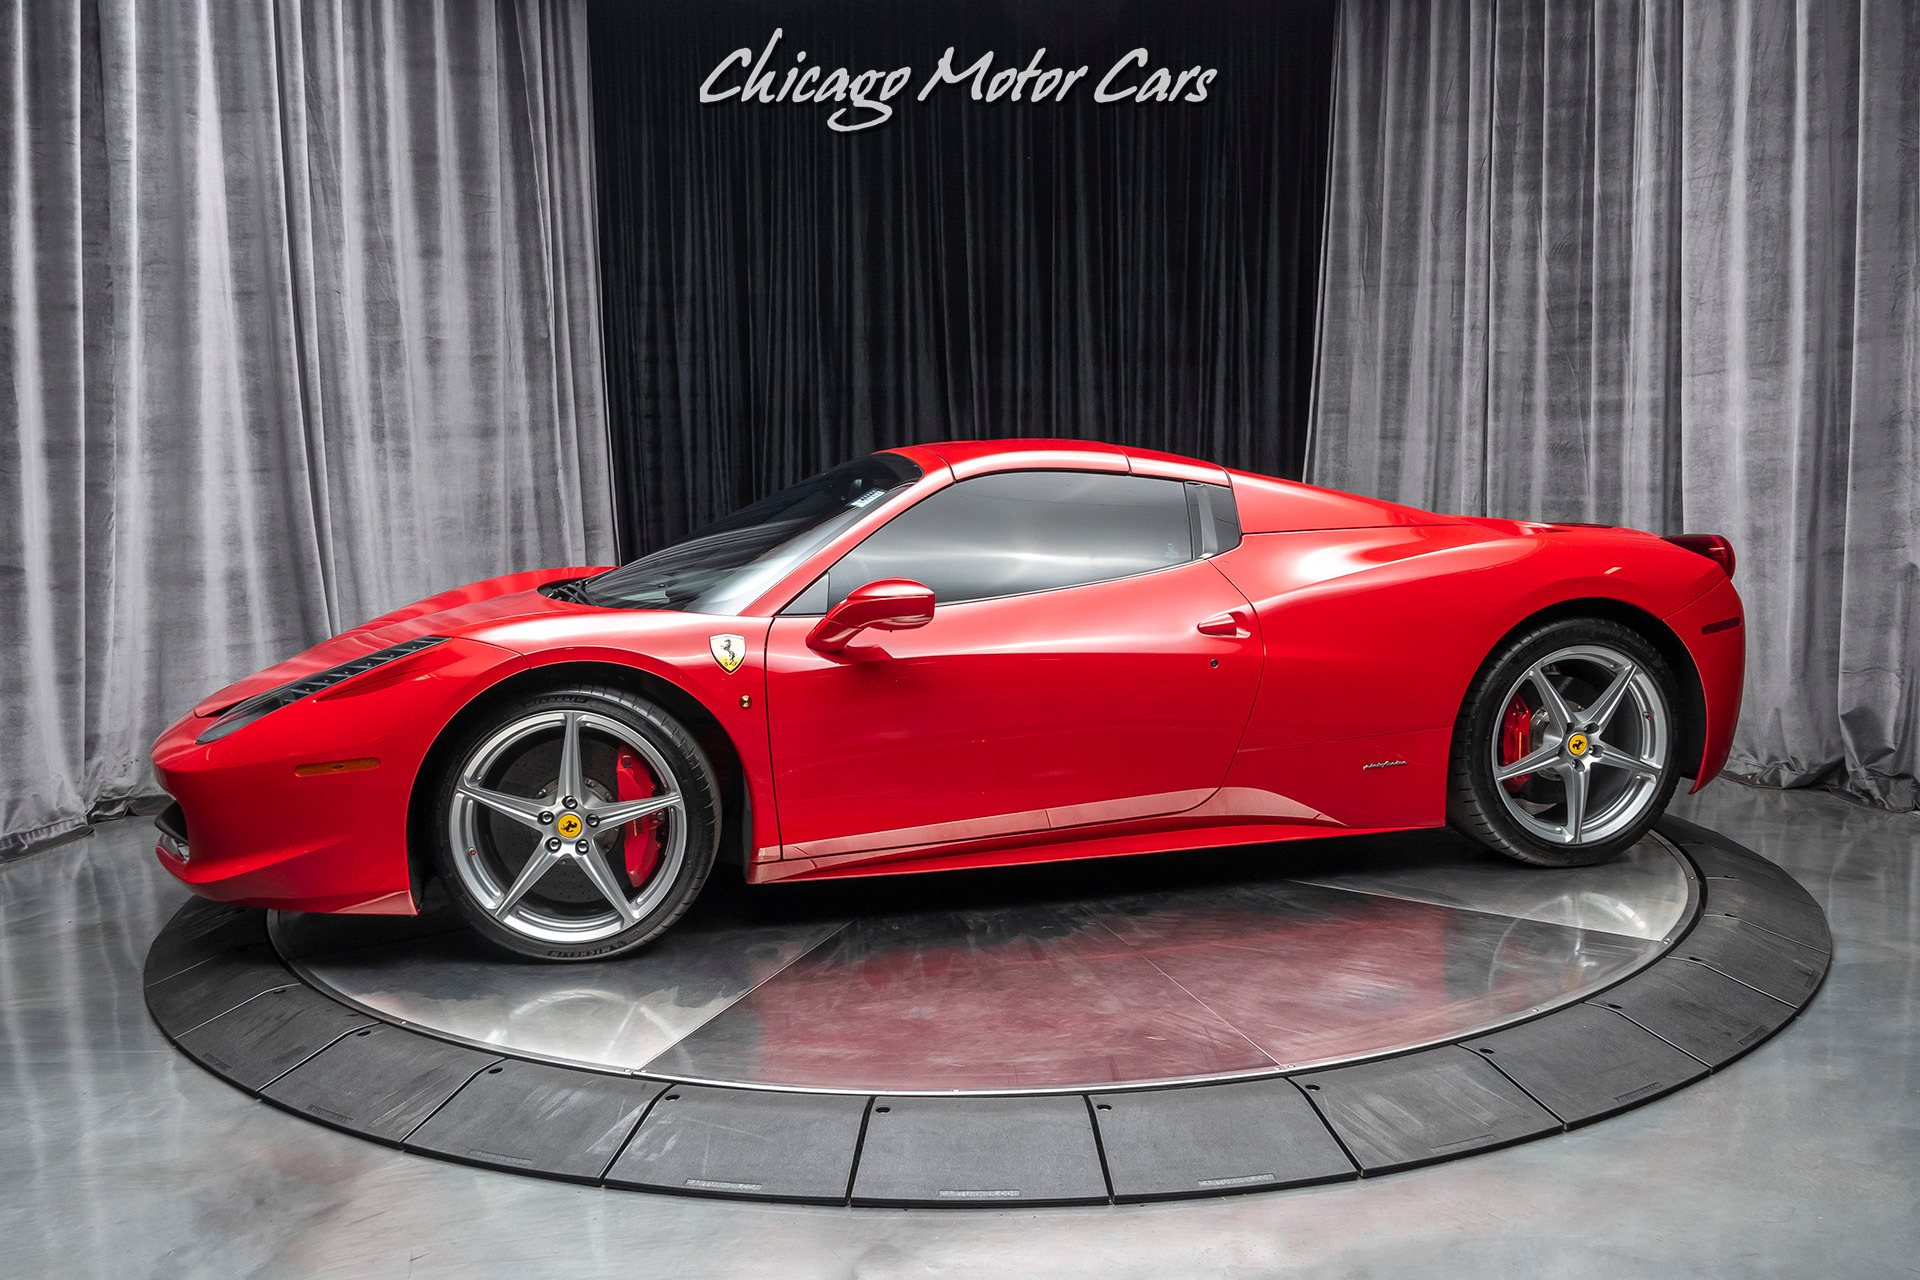 Used 2013 Ferrari 458 Spider Convertible Front Axle Lift! Carbon Fiber LEDs  LOADED & Serviced! For Sale ($185,800) | Chicago Motor Cars Stock #17544A